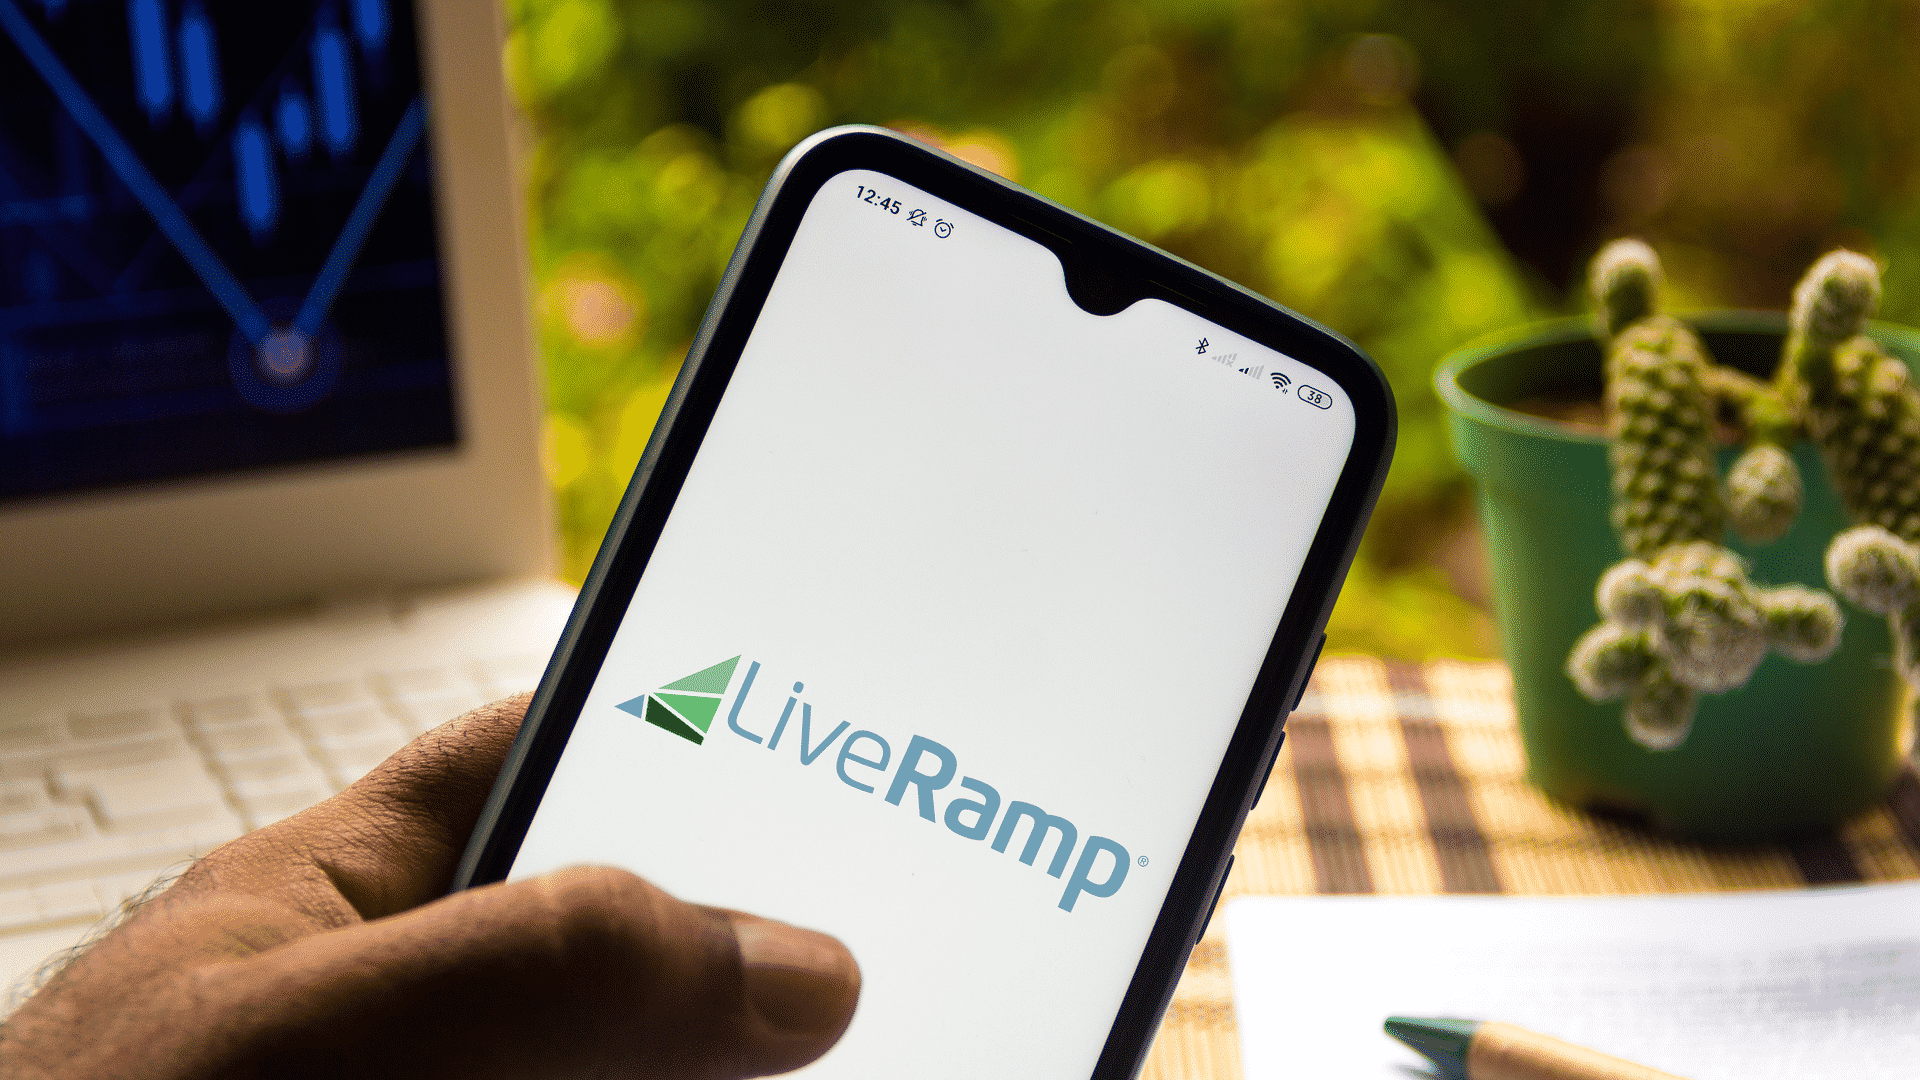 Adobe Advertising Cloud now supports LiveRamp's identity solution